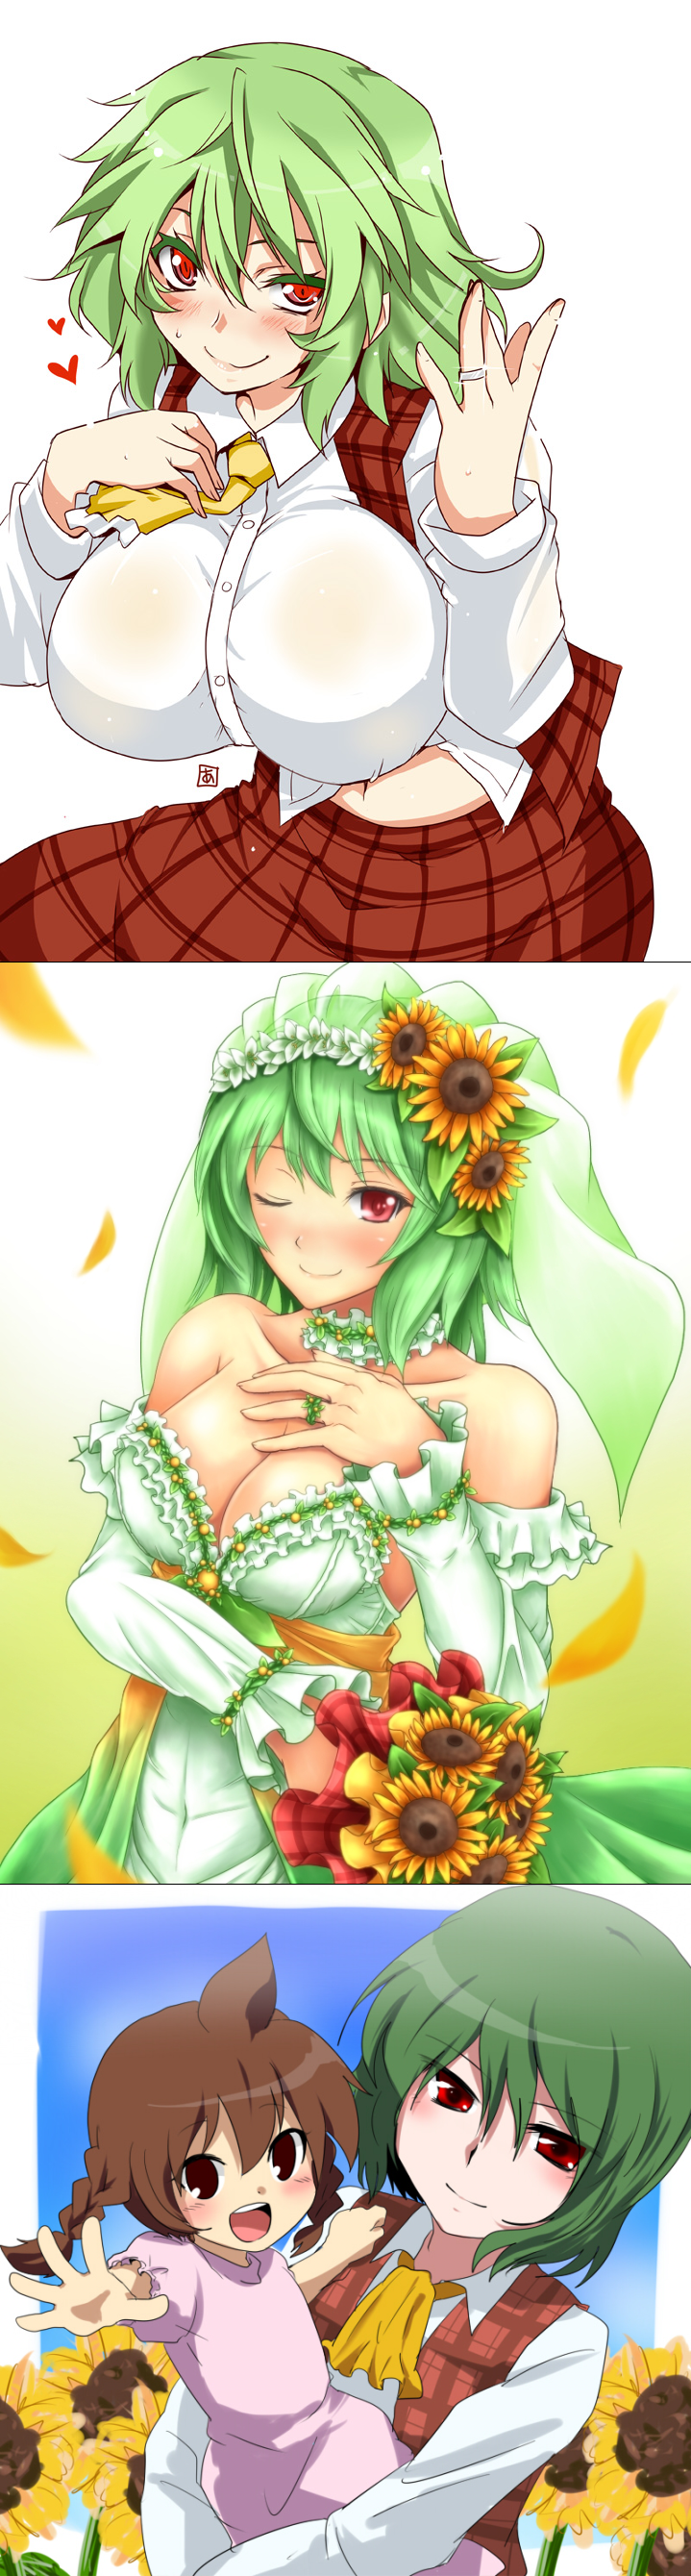 2girls ascot blush bouquet braid breasts bust child choker cleavage daughter flower green_hair heart hearts holding huge_breasts kazami_yuuka looking_at_viewer mother_and_daughter multiple_girls one_eye_closed plaid plaid_skirt red_eyes ring short_hair smile sunflower tartan touhou twin_braids upper_body wedding_dress wink